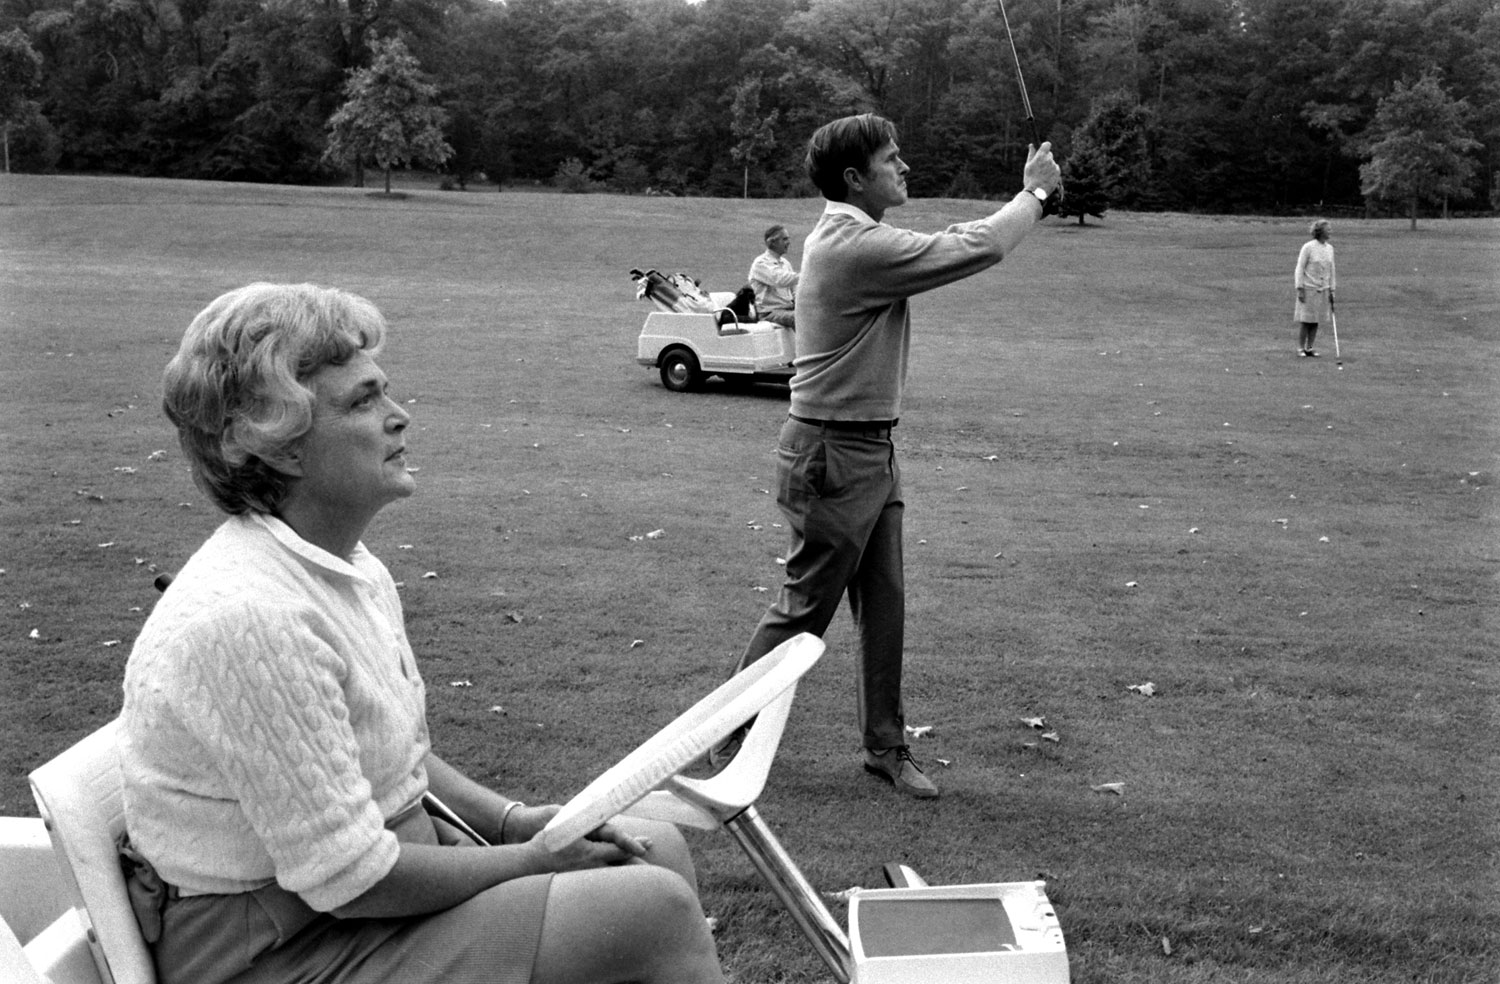 Future First Lady Barbara Bush on the golf course, 1971.